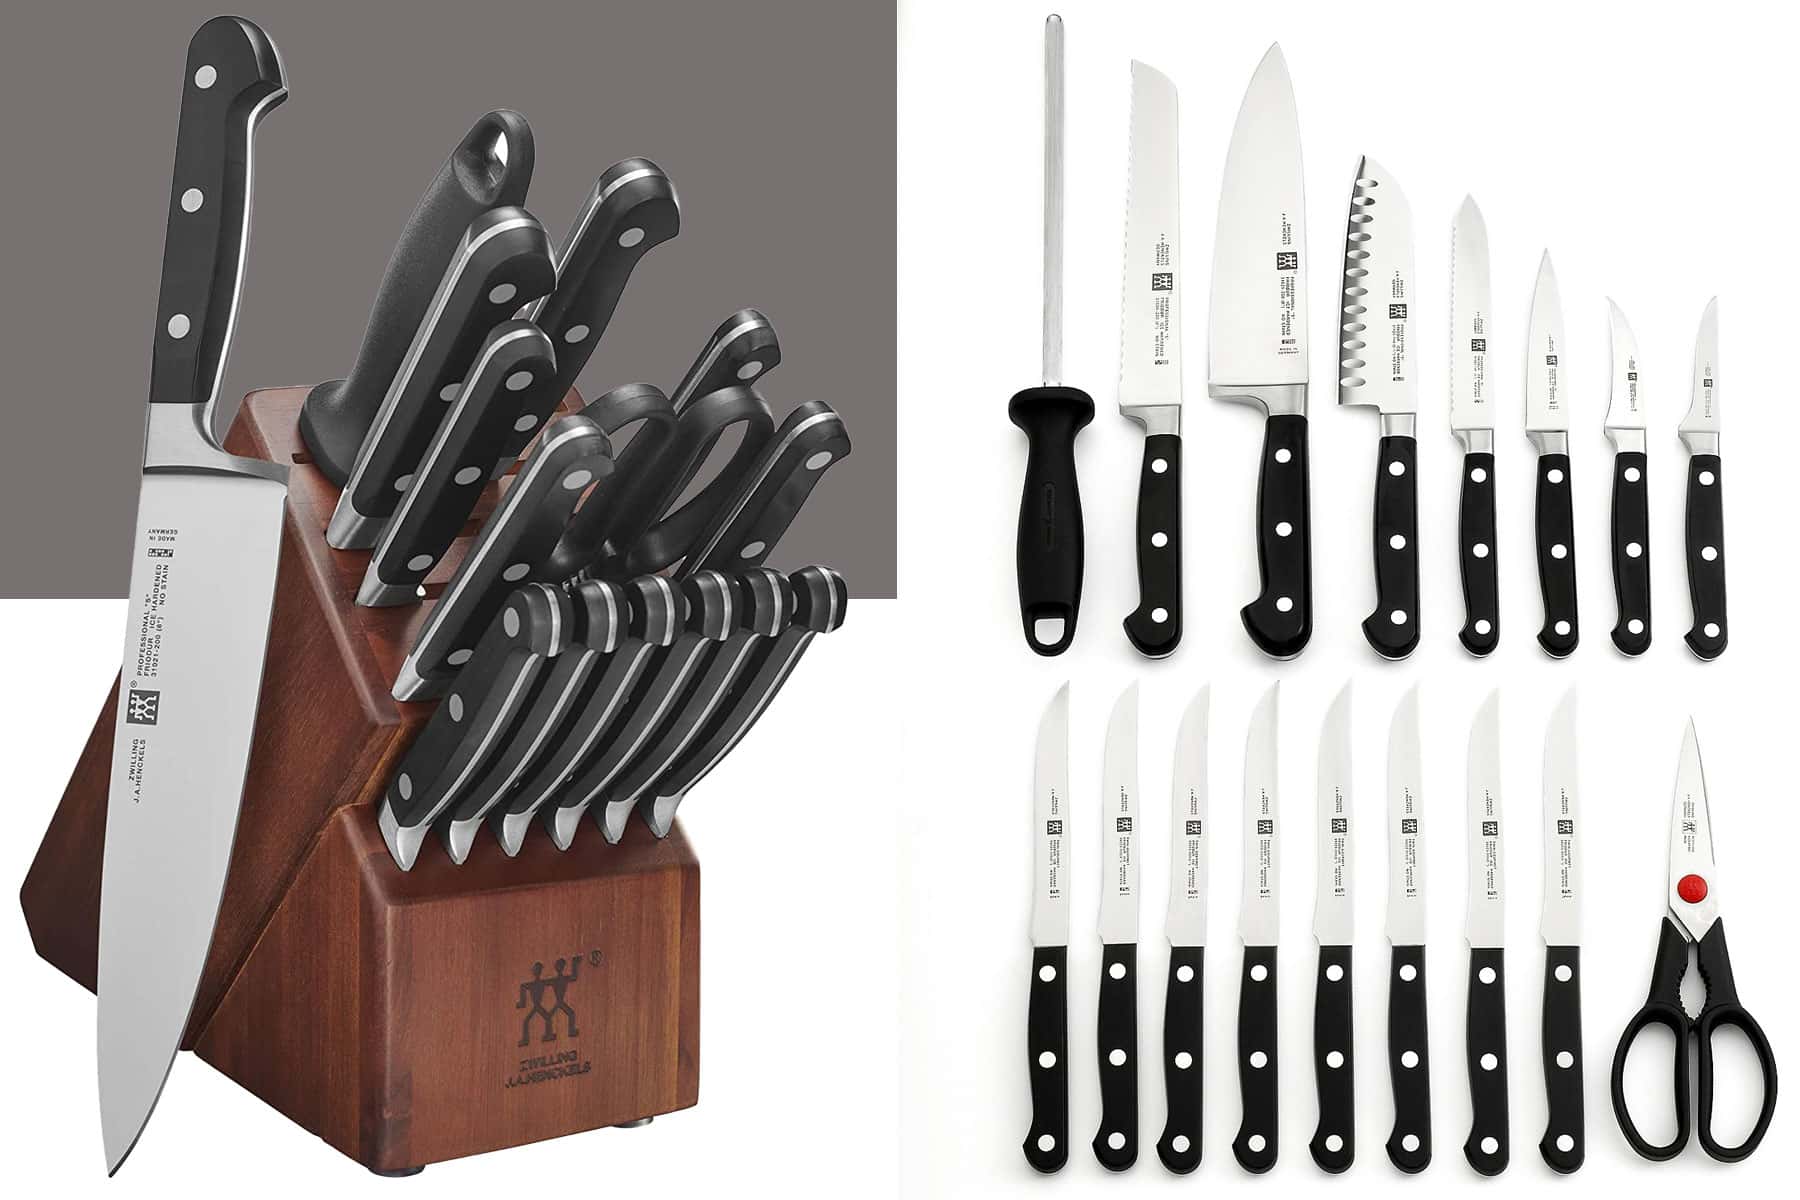 The Zwilling Pro 16-piece knife set with all the knives shown inside and outside of the storage block.